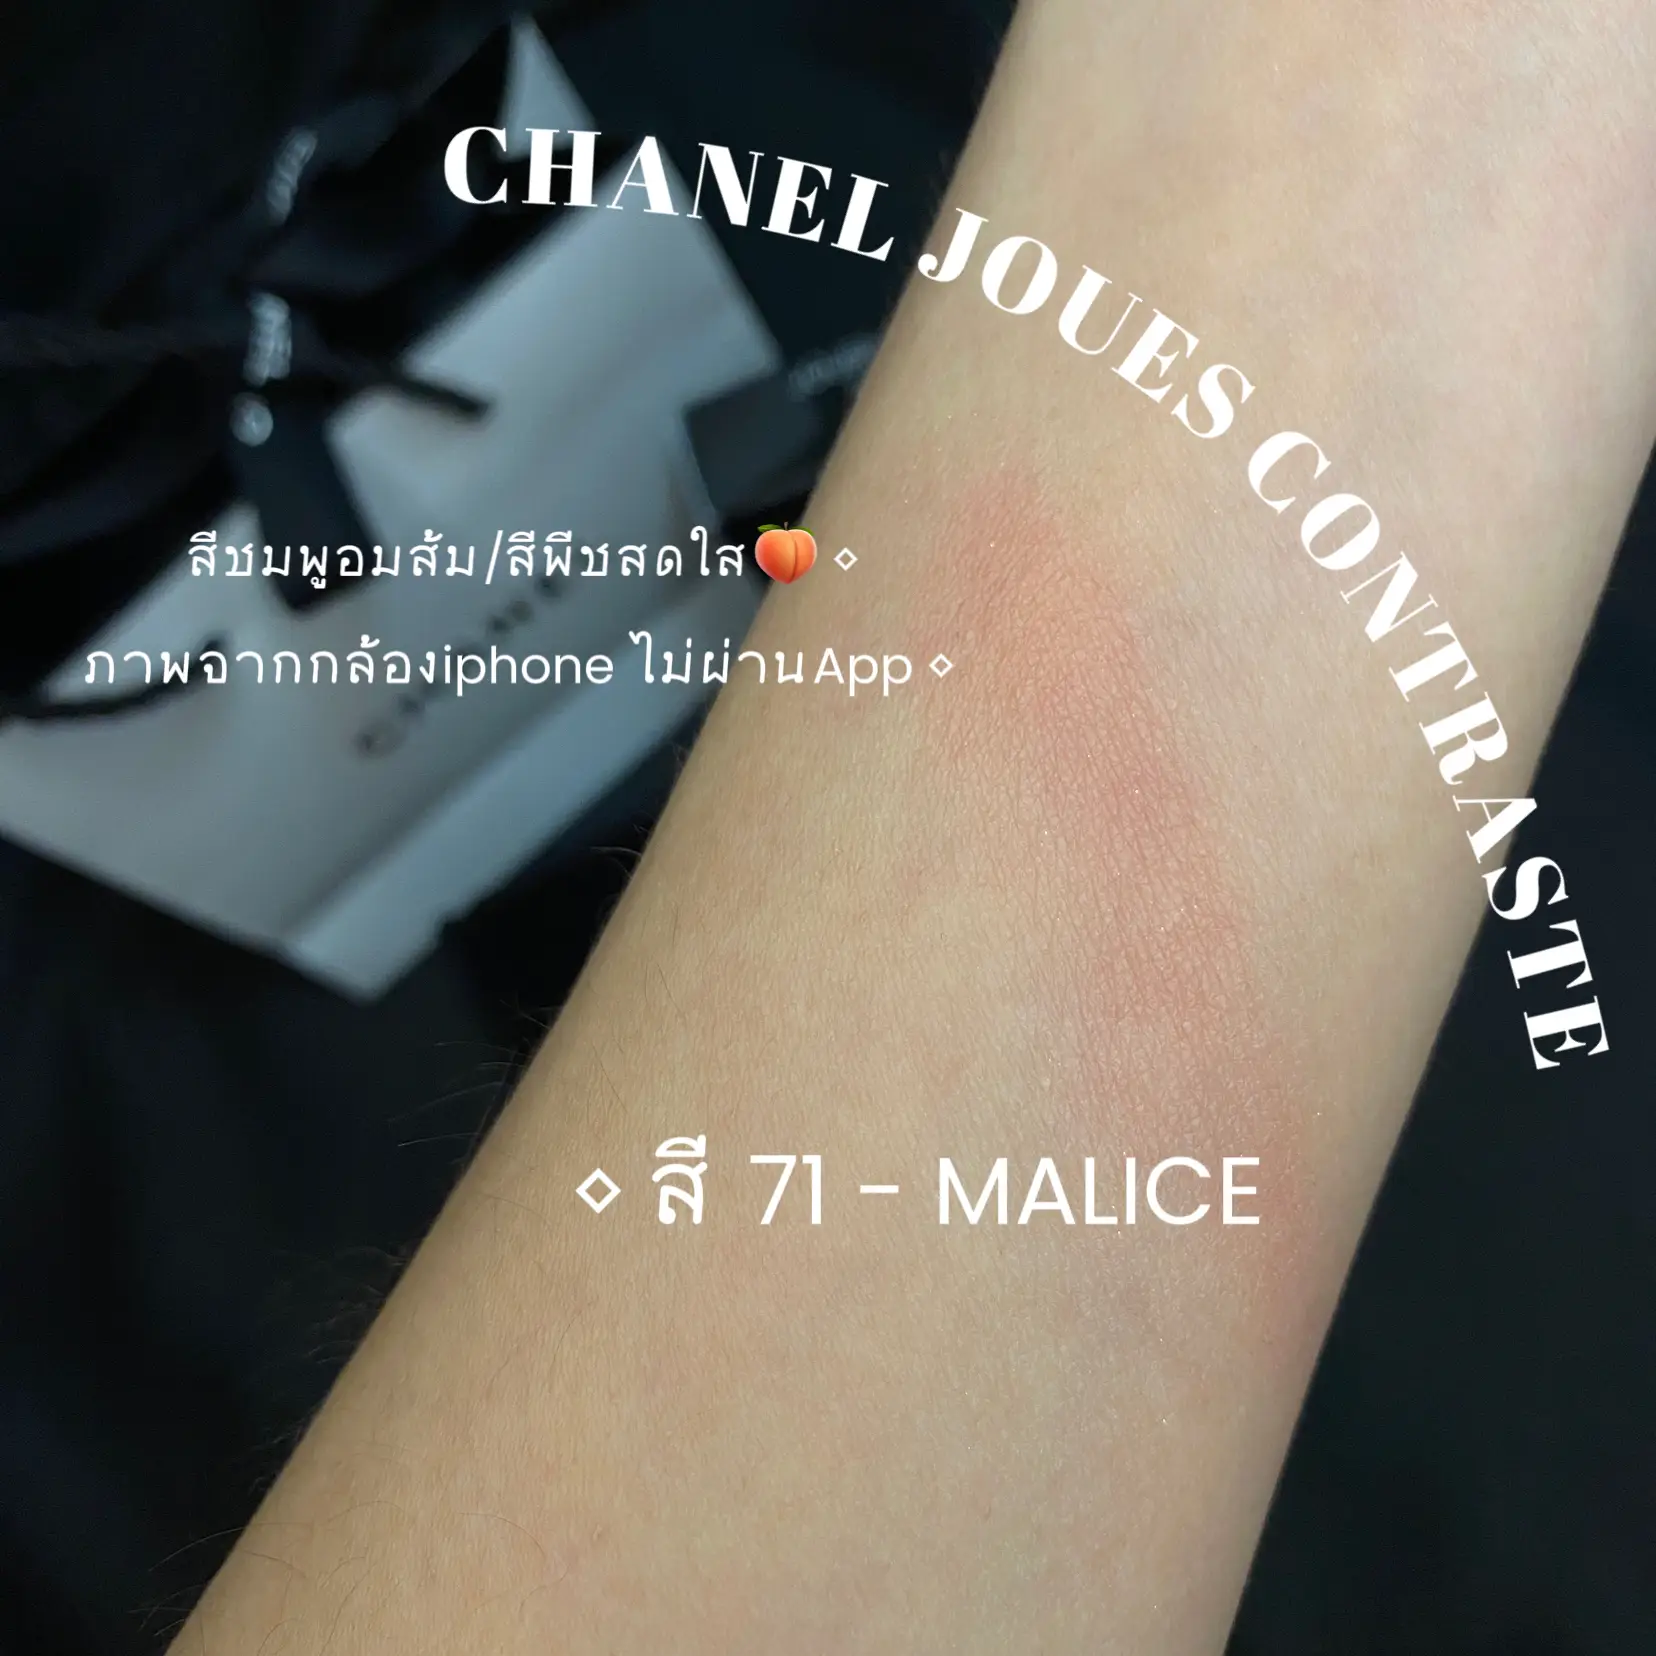 BLUSH REVIEW CHANEL JOUES CONTRASTE • 71 - MALICE, Gallery posted by  mme.eye